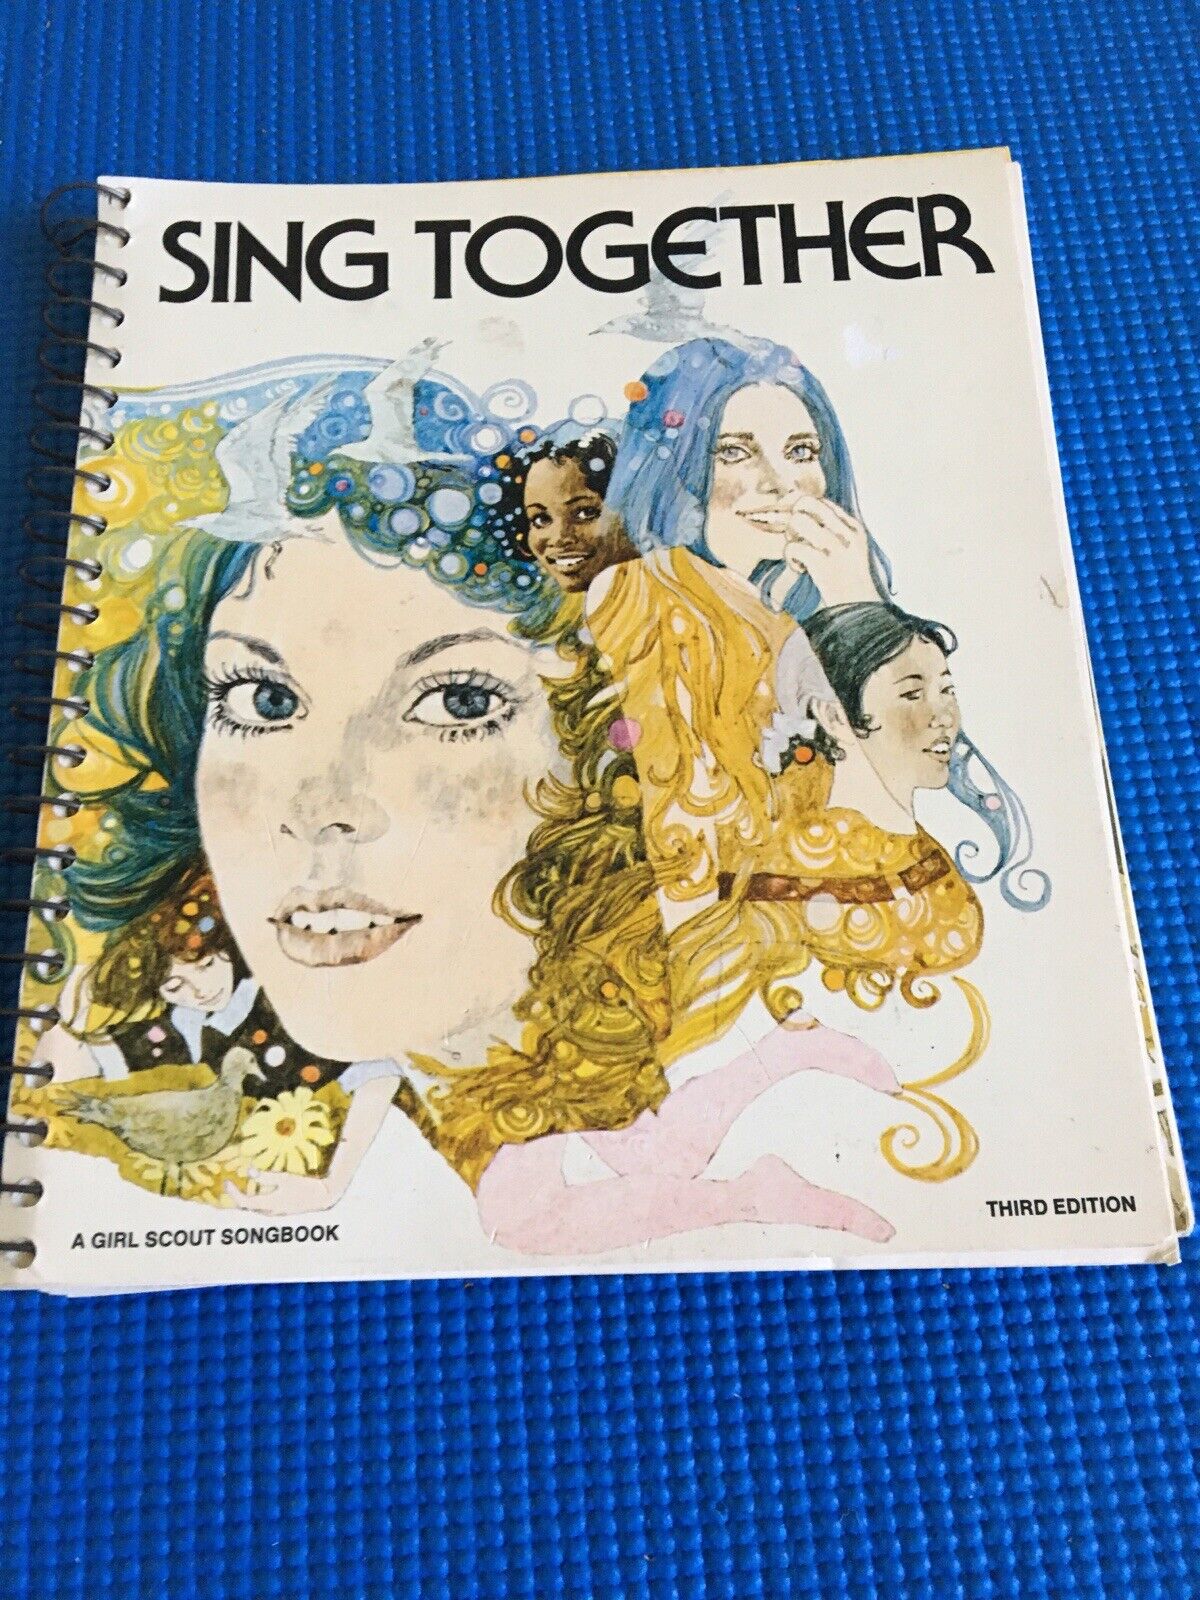 Girl Scouts Songbook Sing Together Third Edition 1973